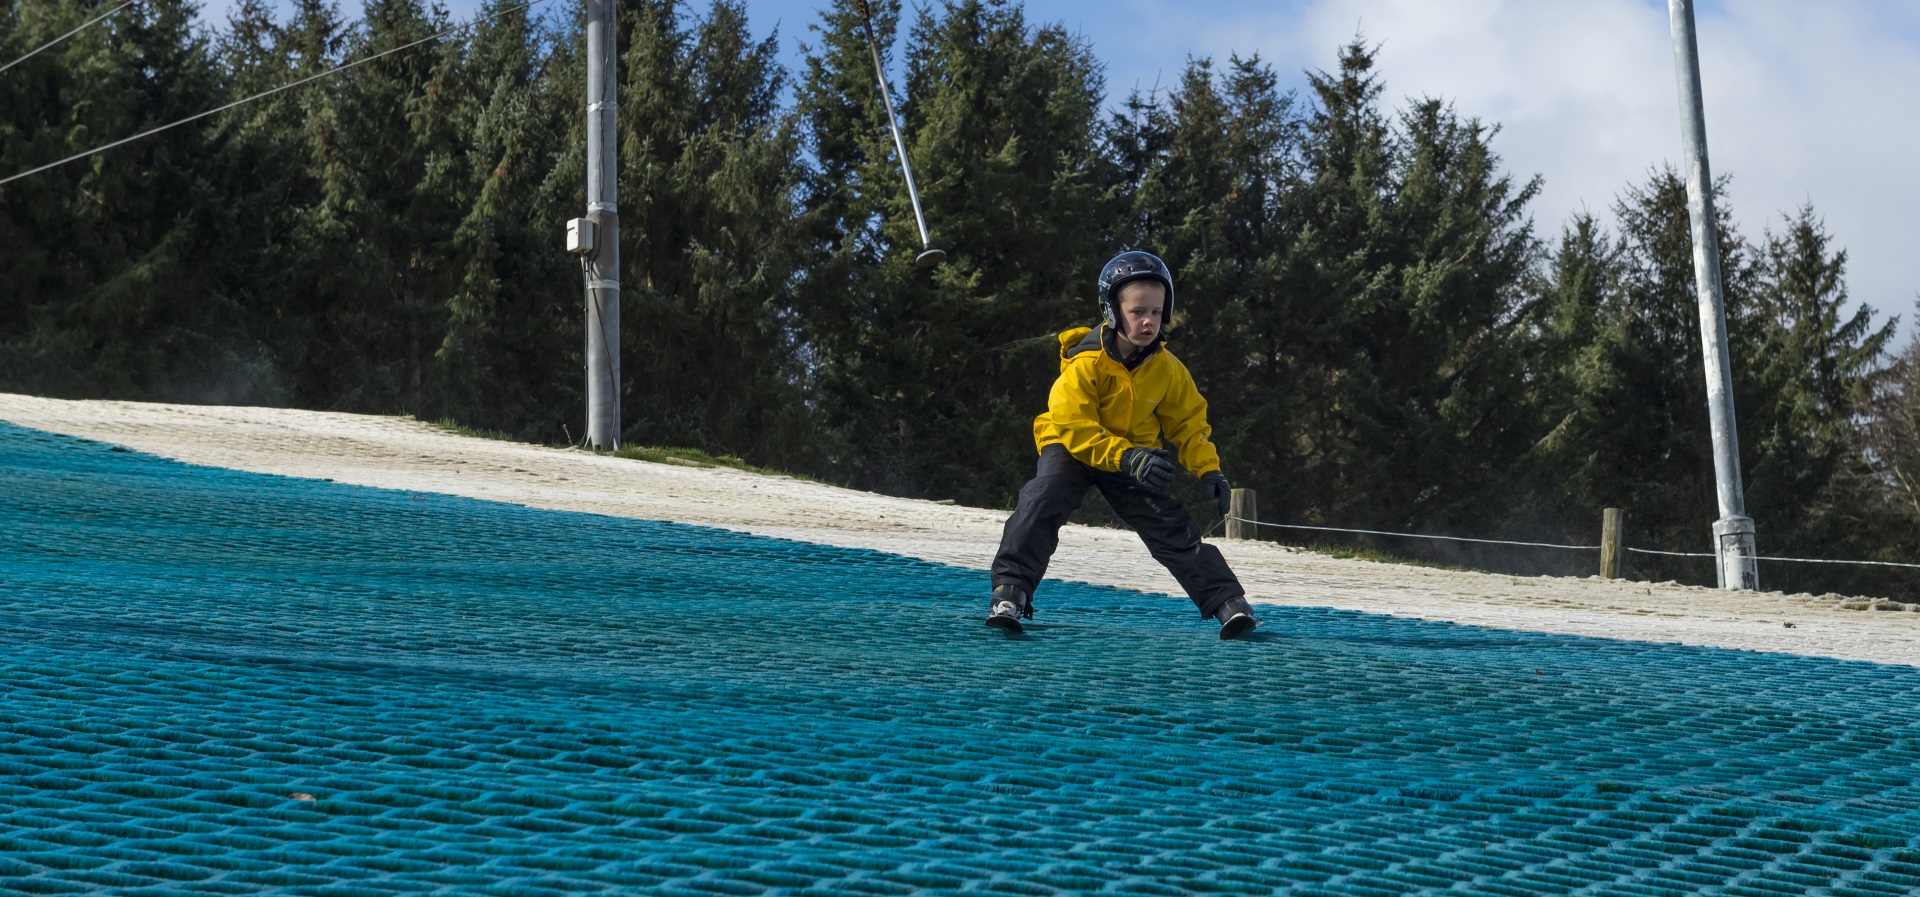 A person going skiing down a dry ski slope